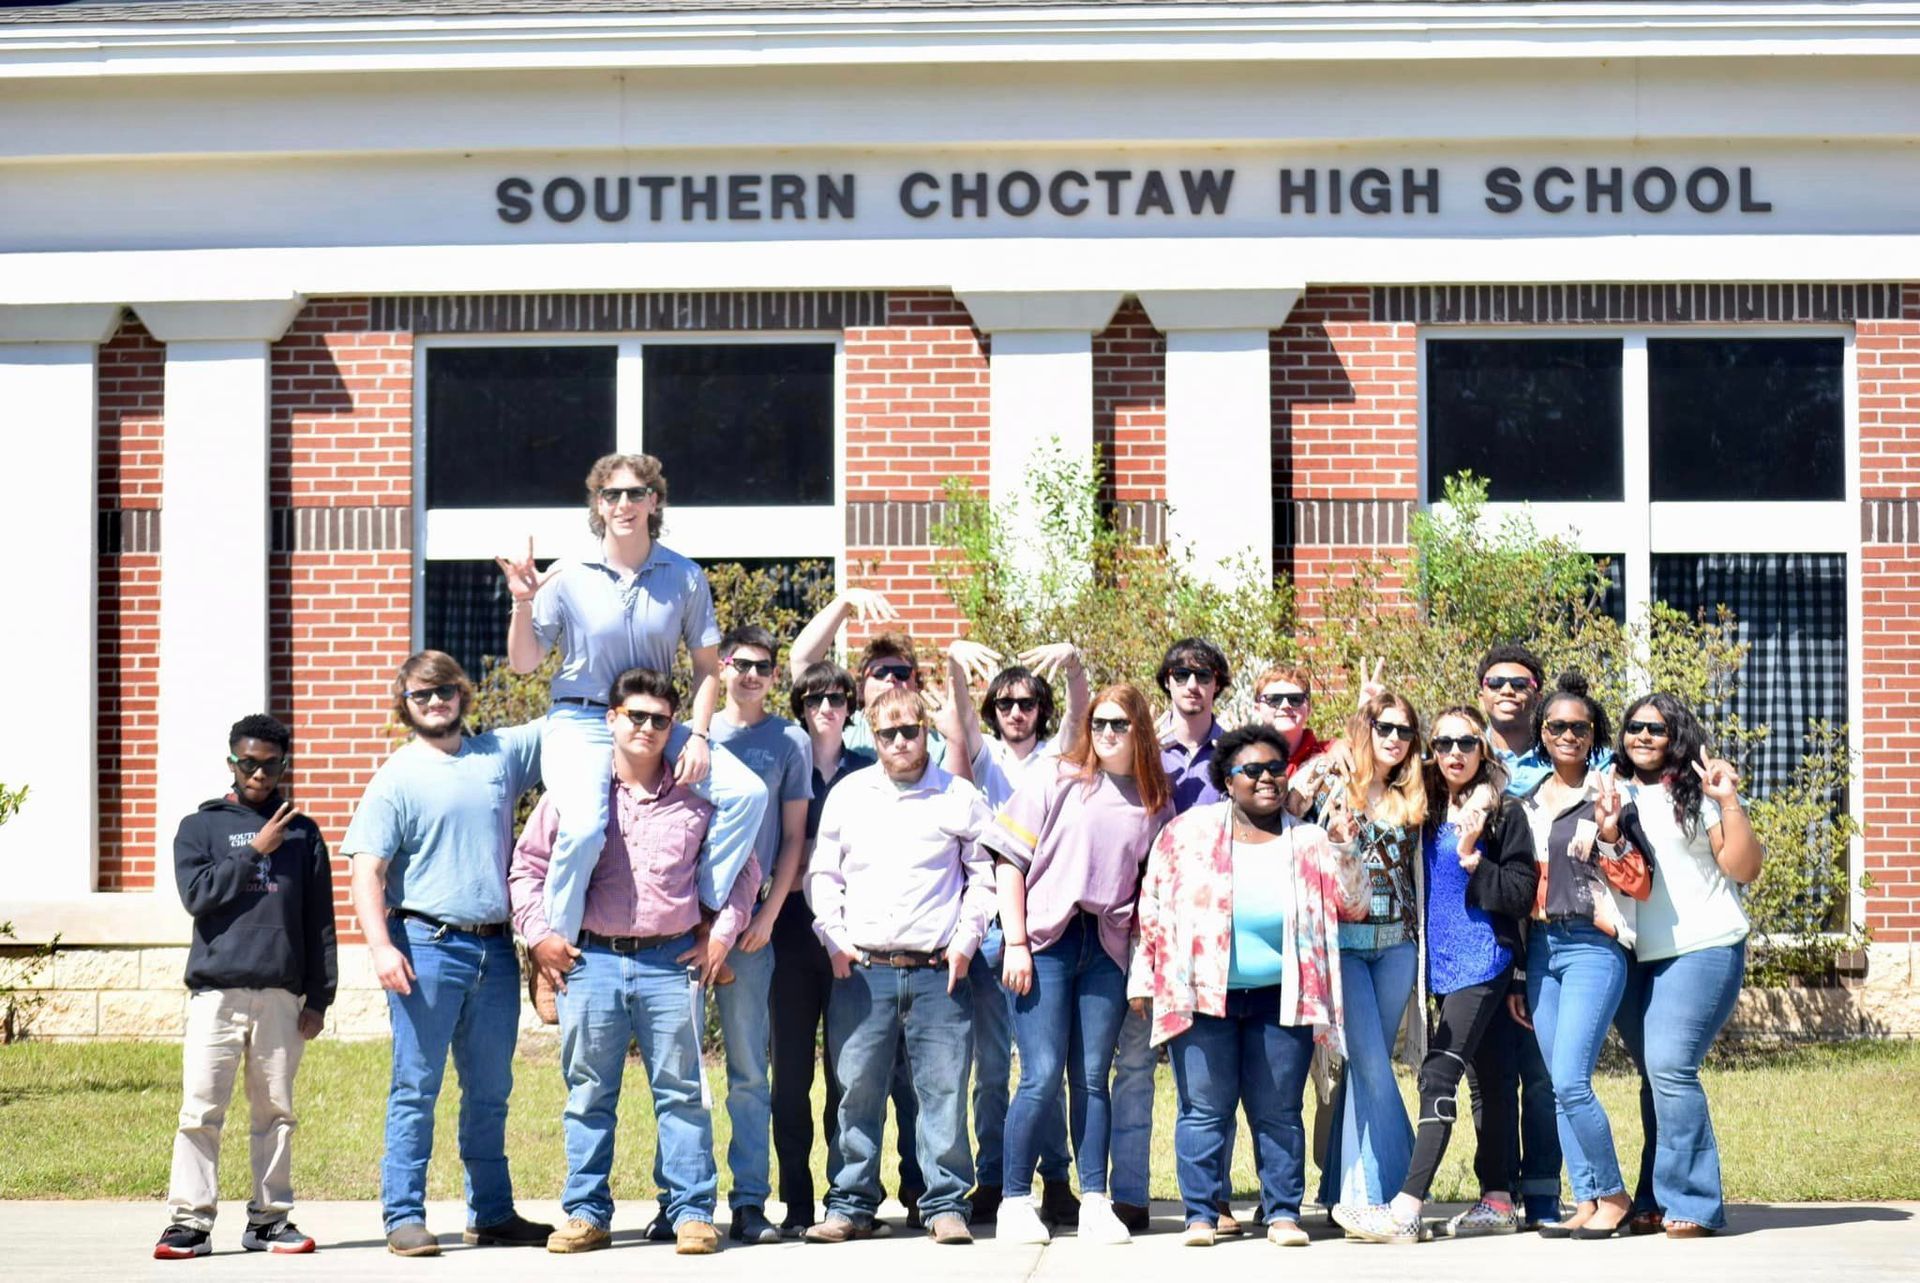 a group of people are posing for a picture in front of southern choctaw high school .